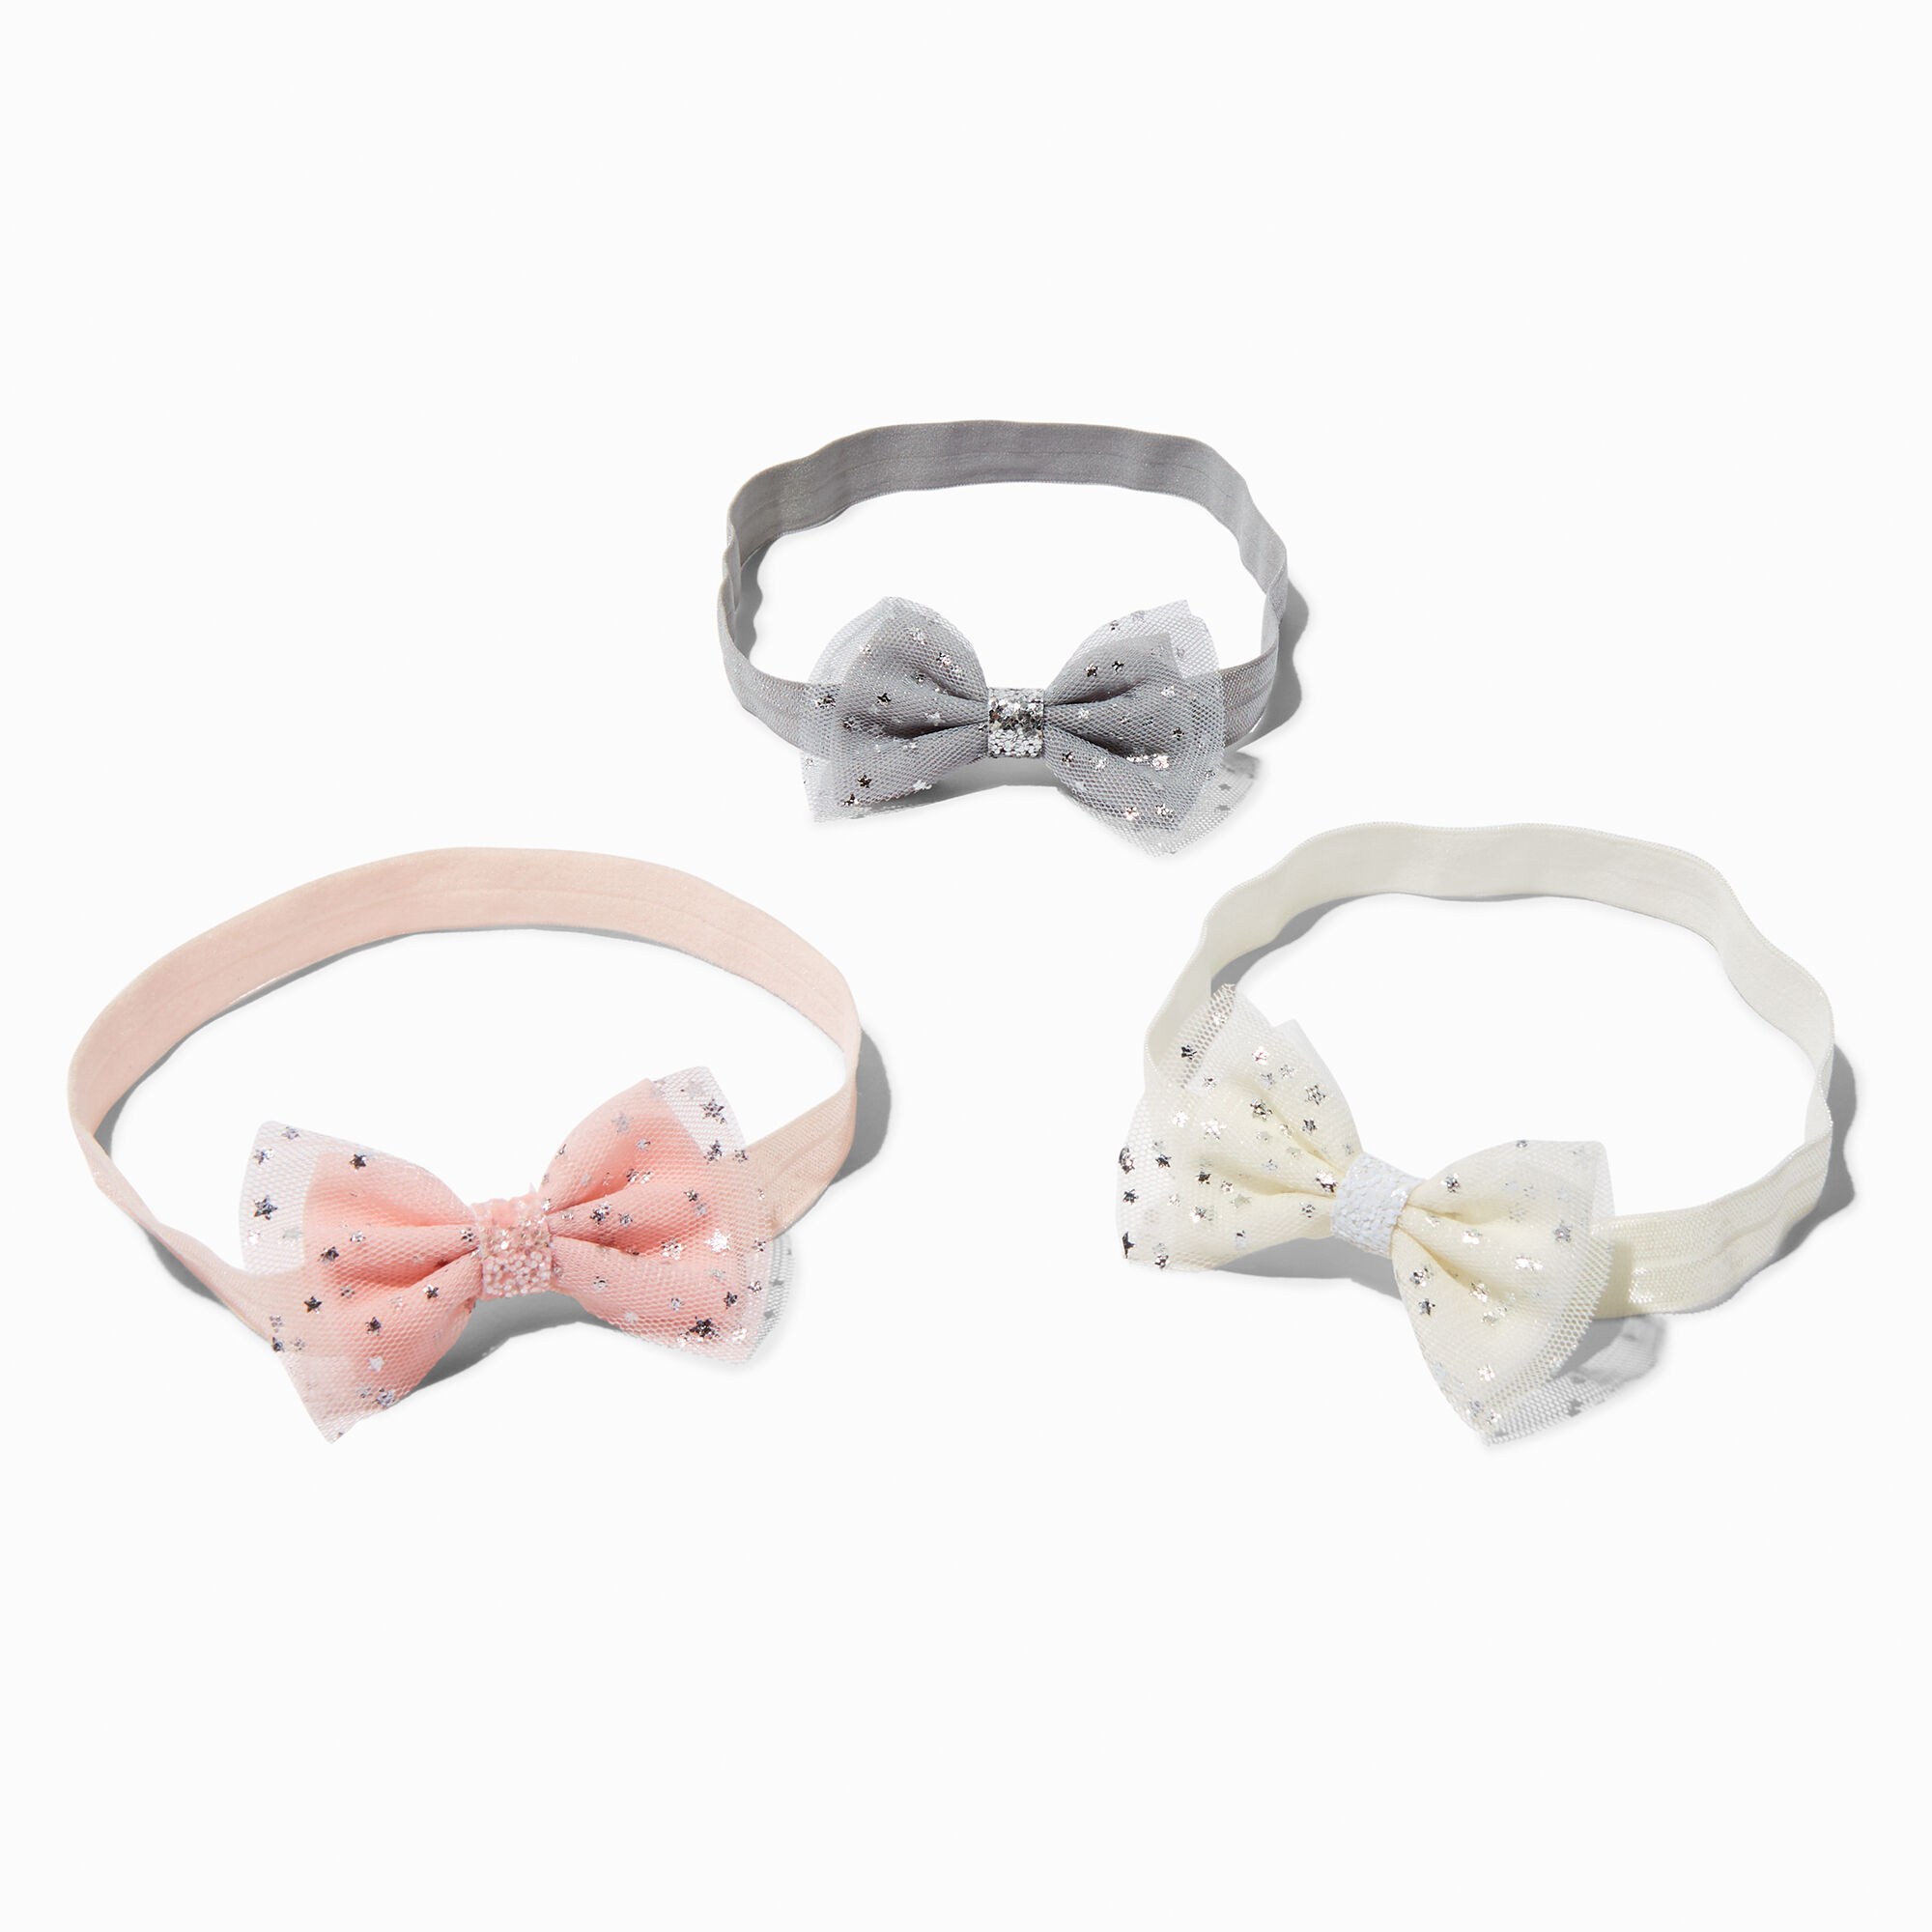 View Claires Club Neutral Bow Headwraps 3 Pack information